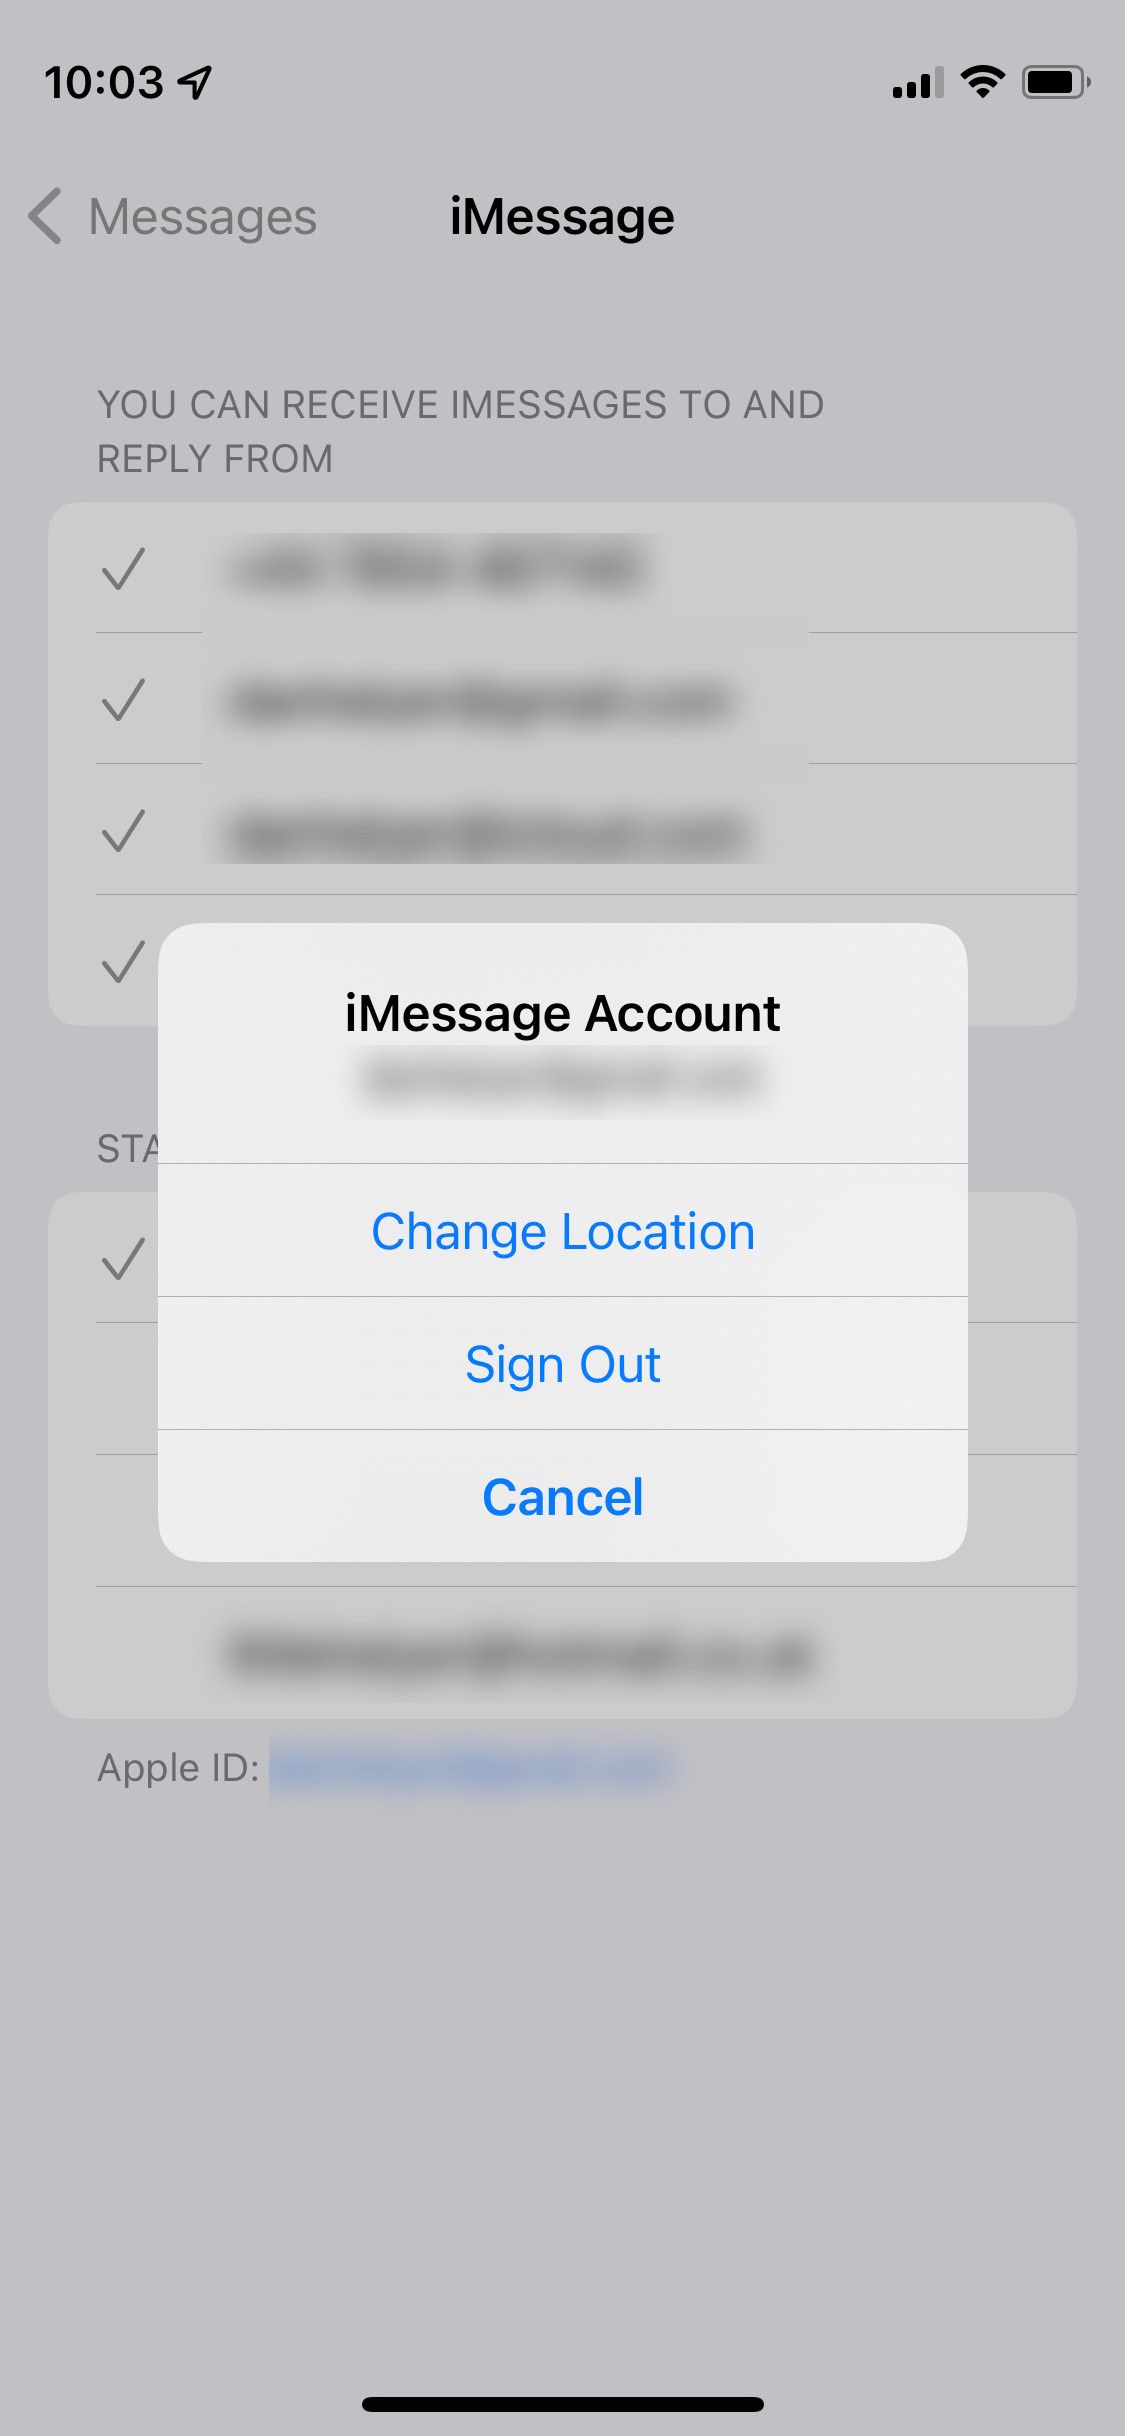 imessage on mac keeps asking for password